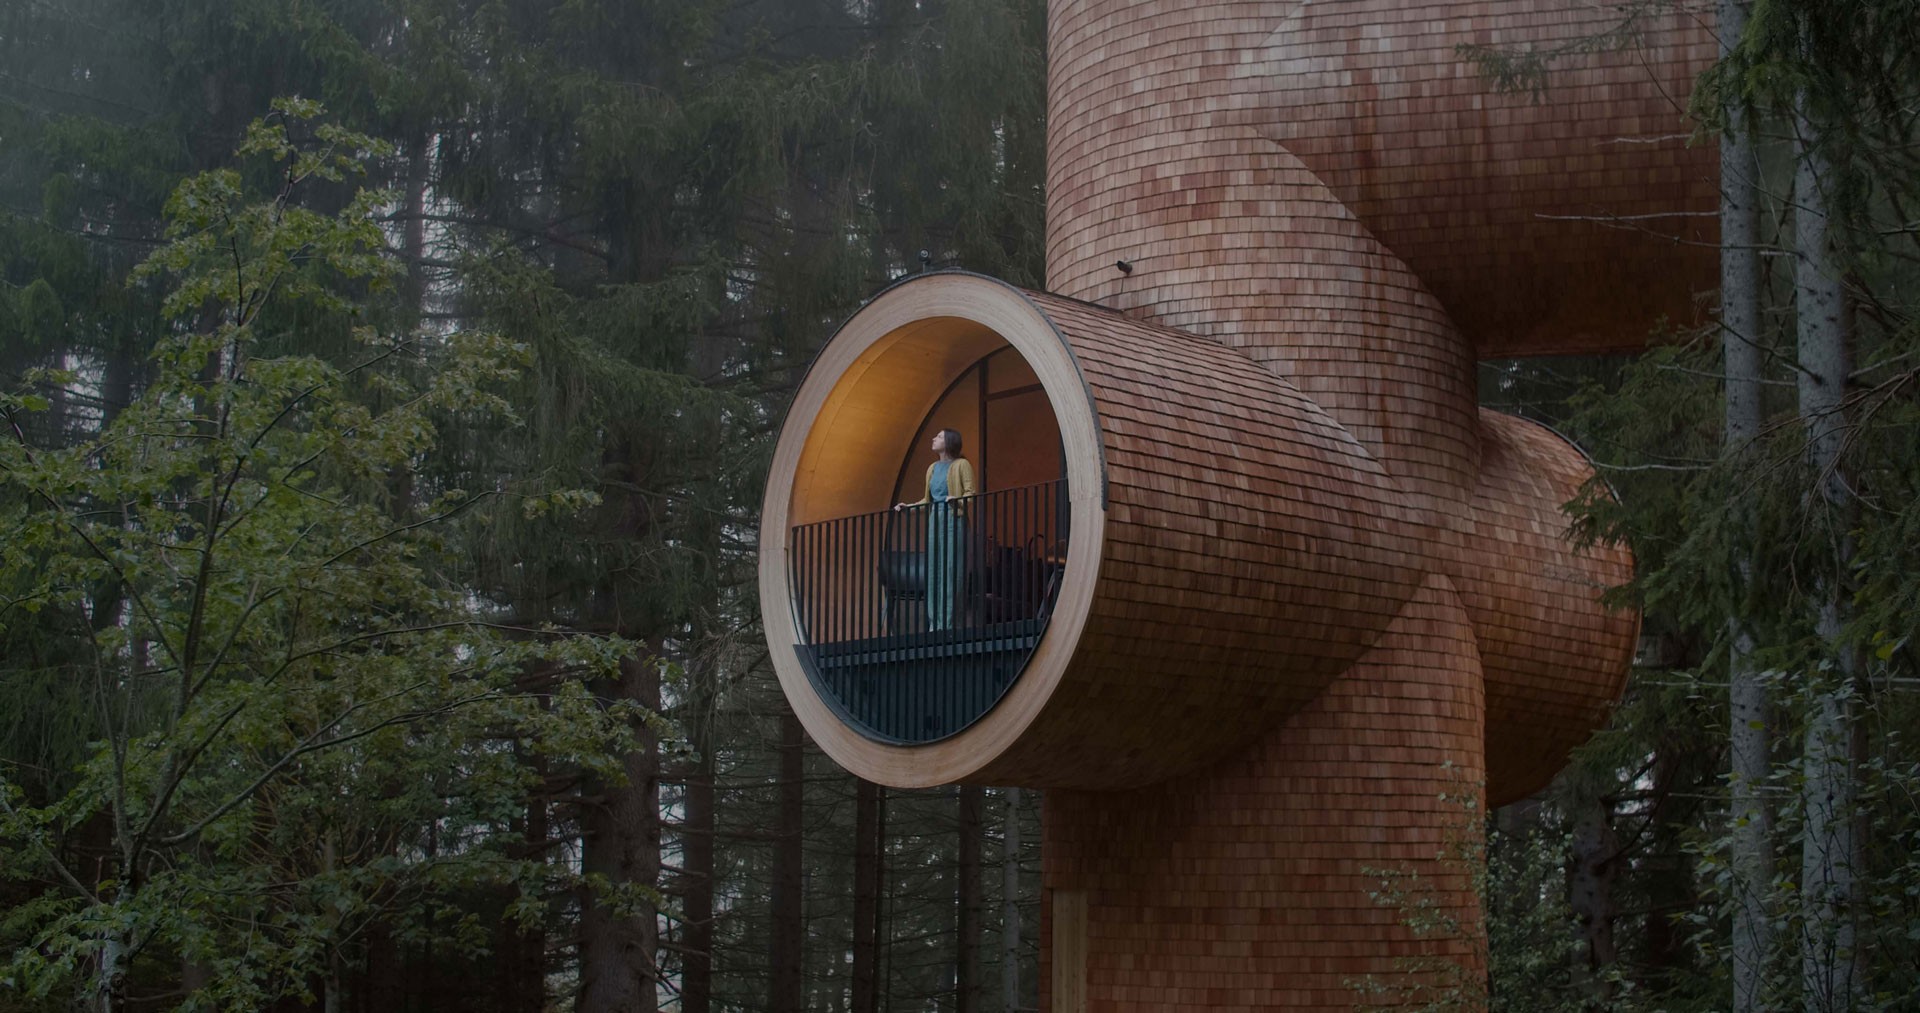 An oversized tree house in the shape of a tube in the middle of a forest.